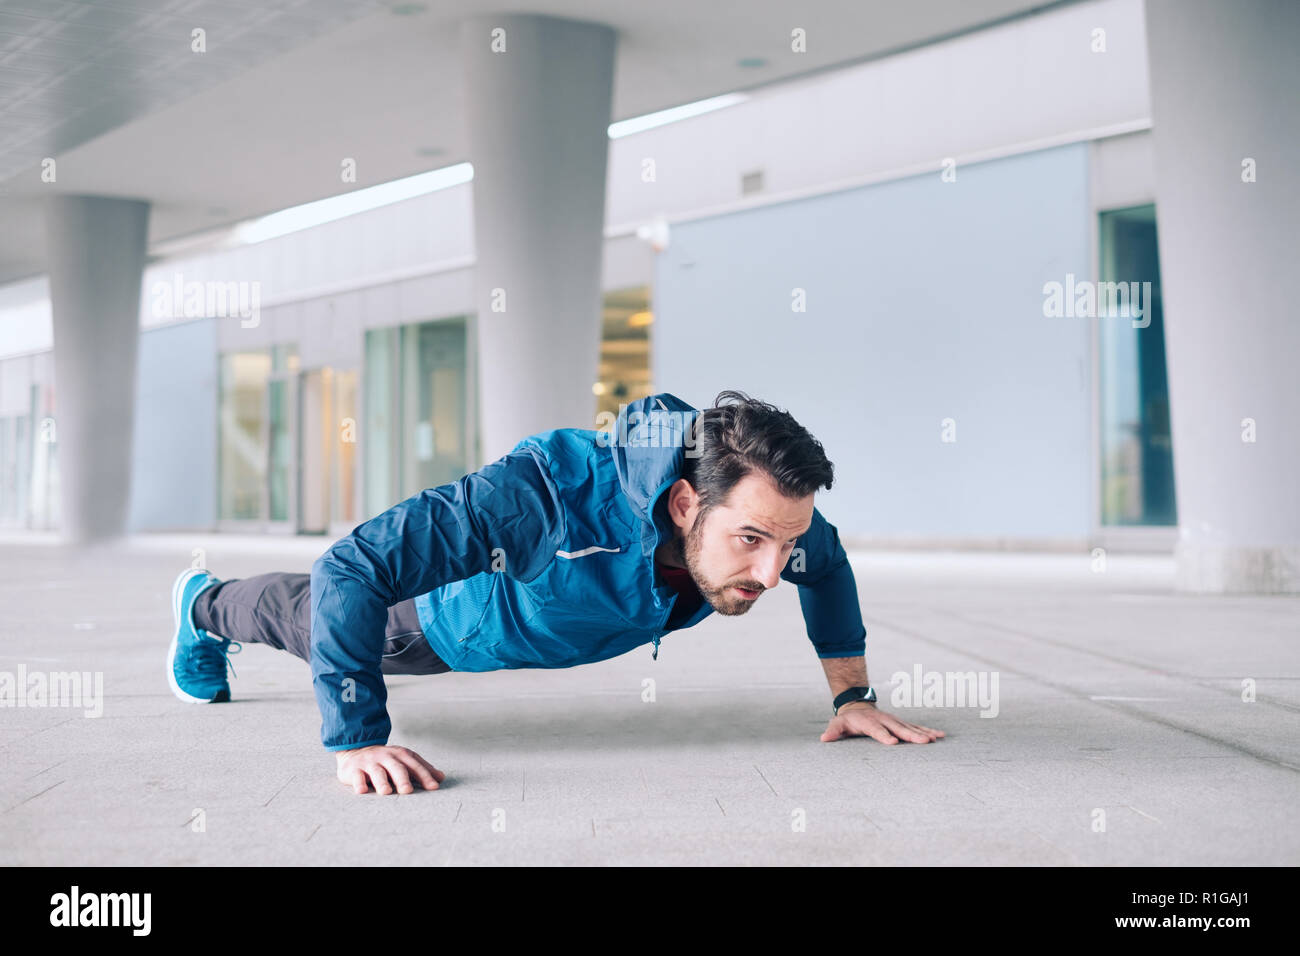 One athlete training with push-up repetitions exercise Stock Photo